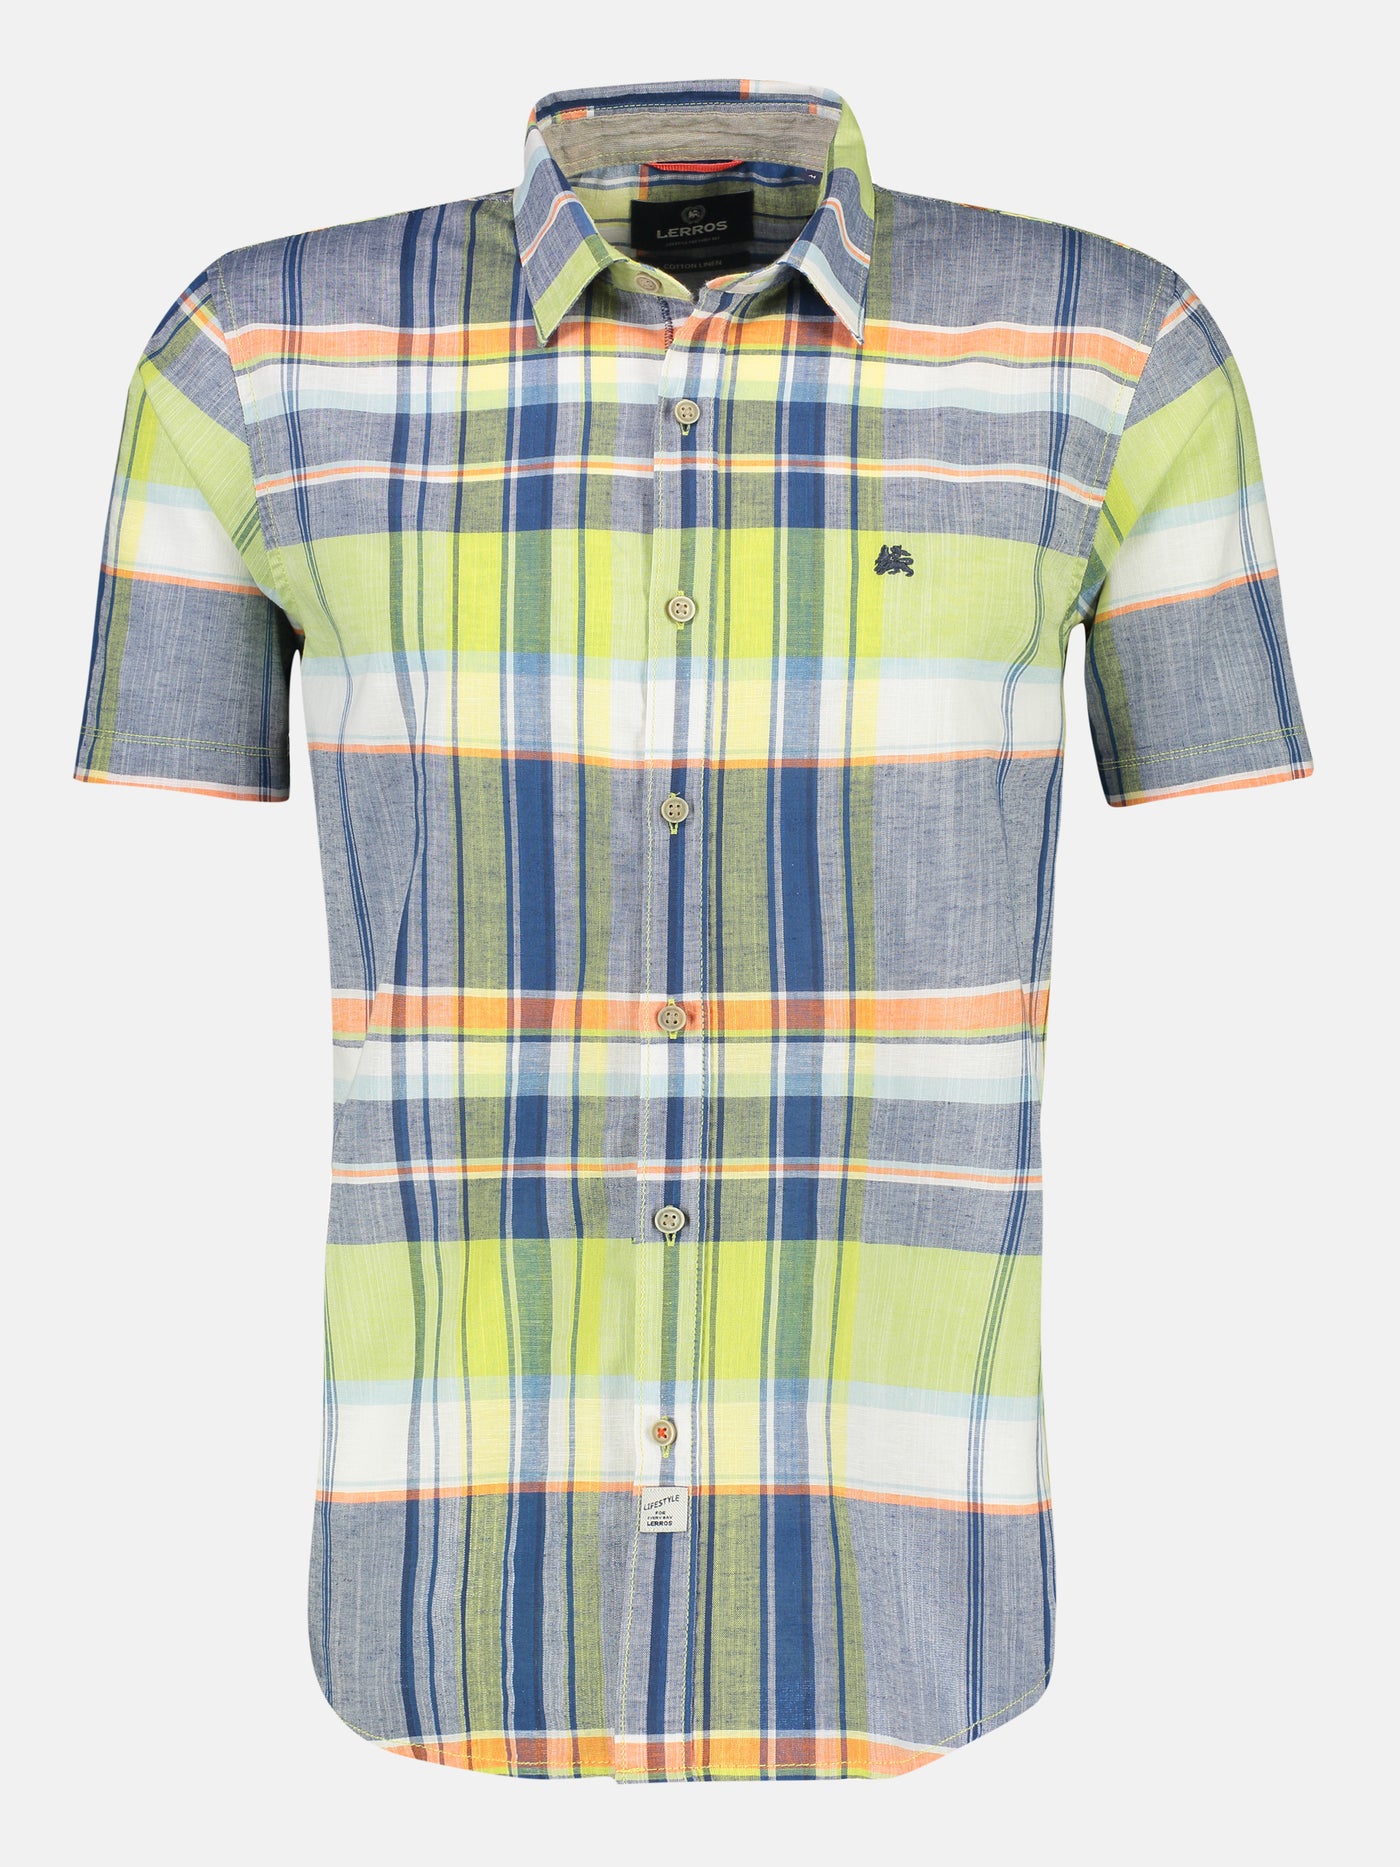 Short-sleeved shirt in mix check